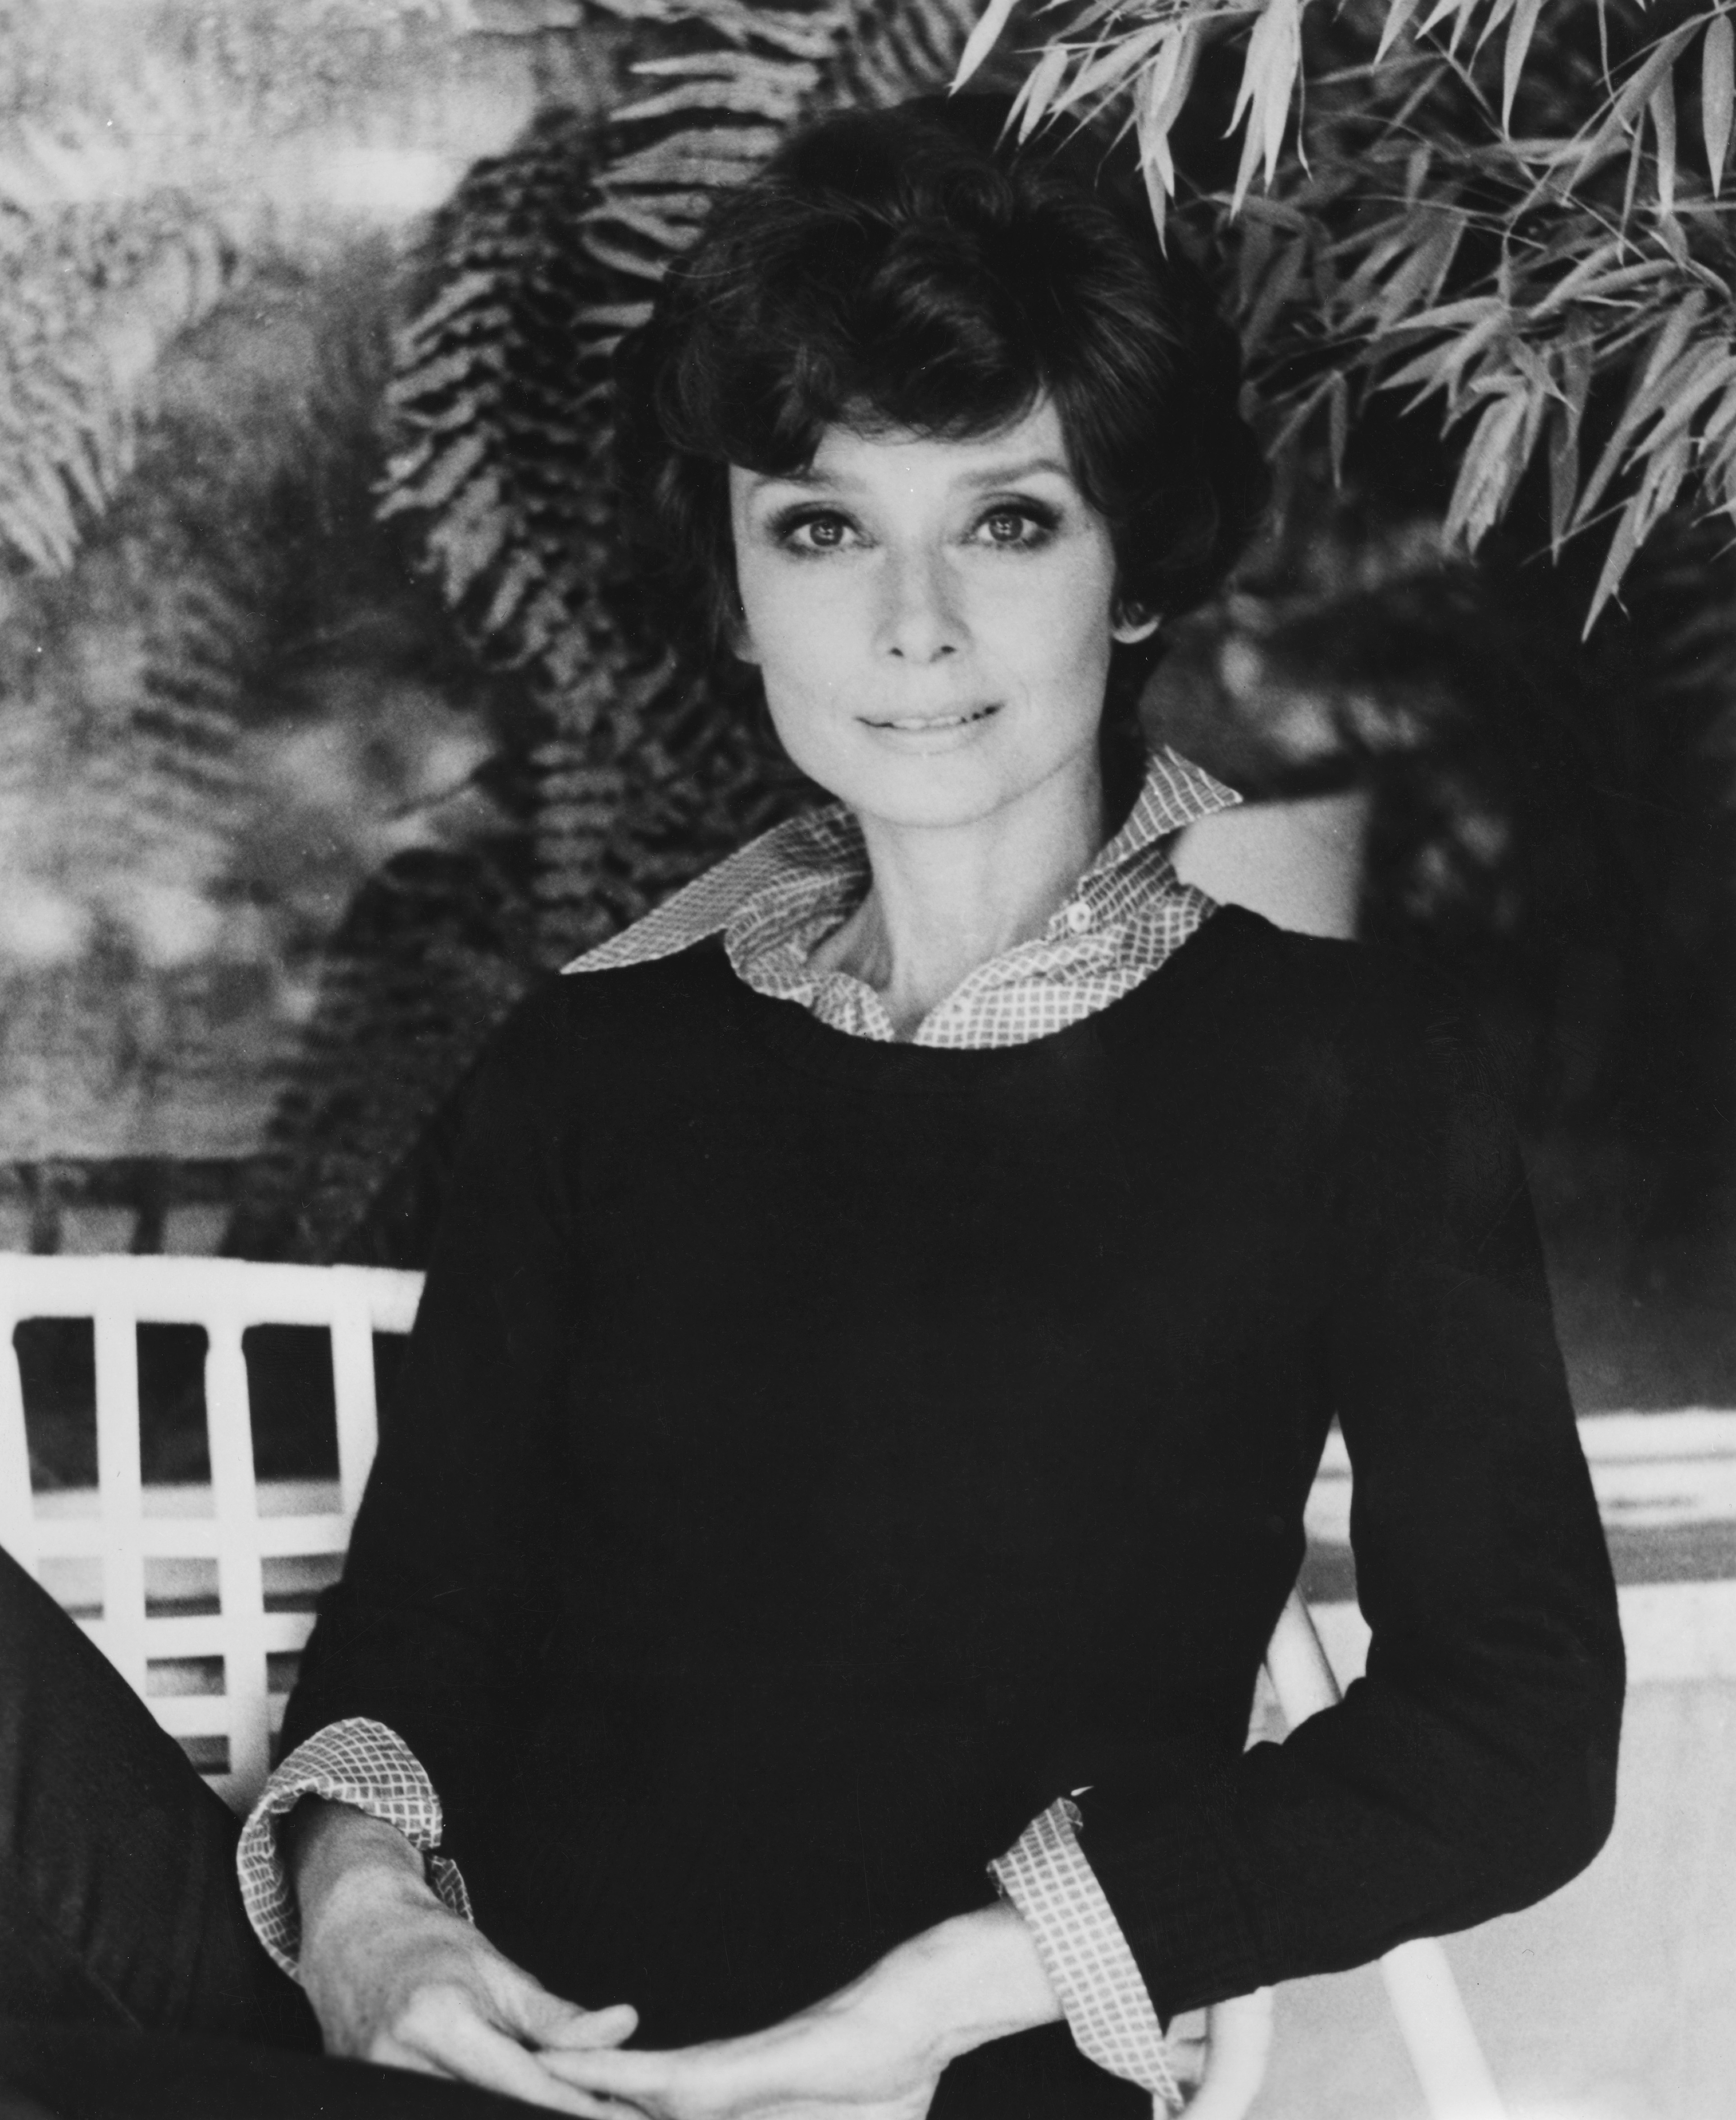 Audrey Hepburn poses with hands clasped, wearing a classic black top with checkered collar and cuffs